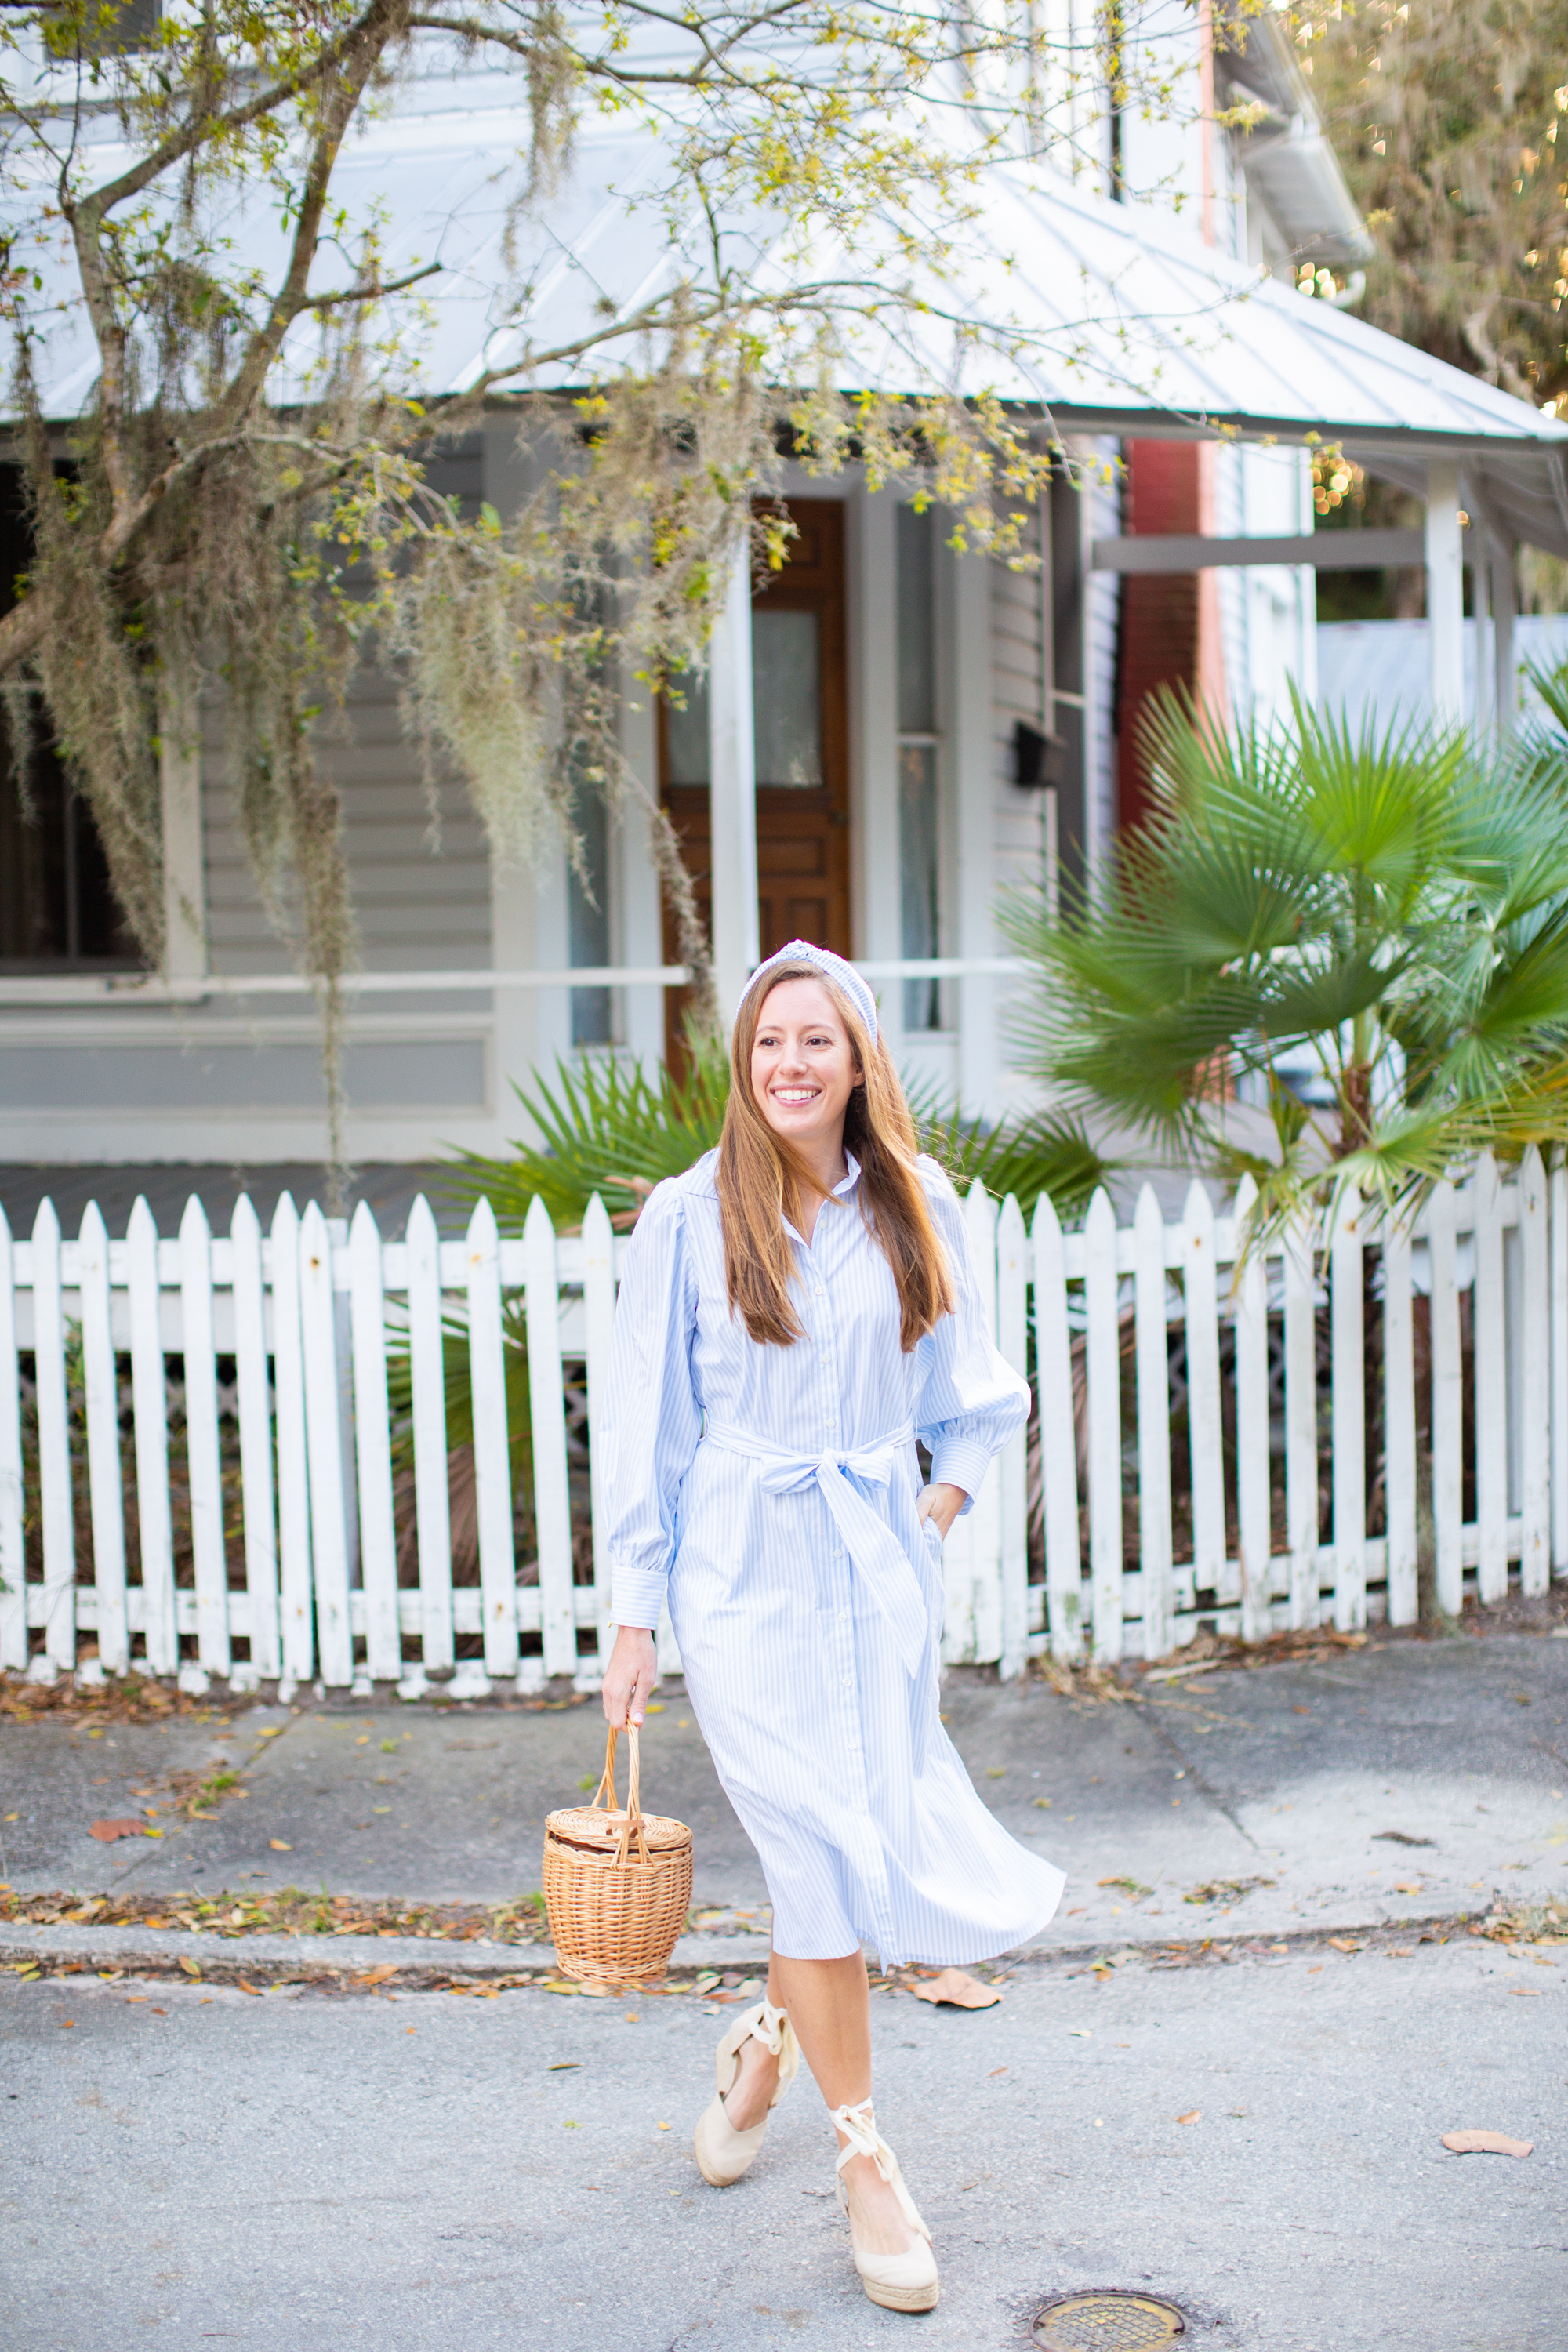 How to Style a Long Sleeve Striped Dress for Spring / Easter Dress / Easter Outfit / Spring Dress / Blue Stripe Dress / Spring Outfit Inspiration / Blue Striped Headband / Sunshine Style - A Florida Based Fashion and Lifestyle Blog by Katie 